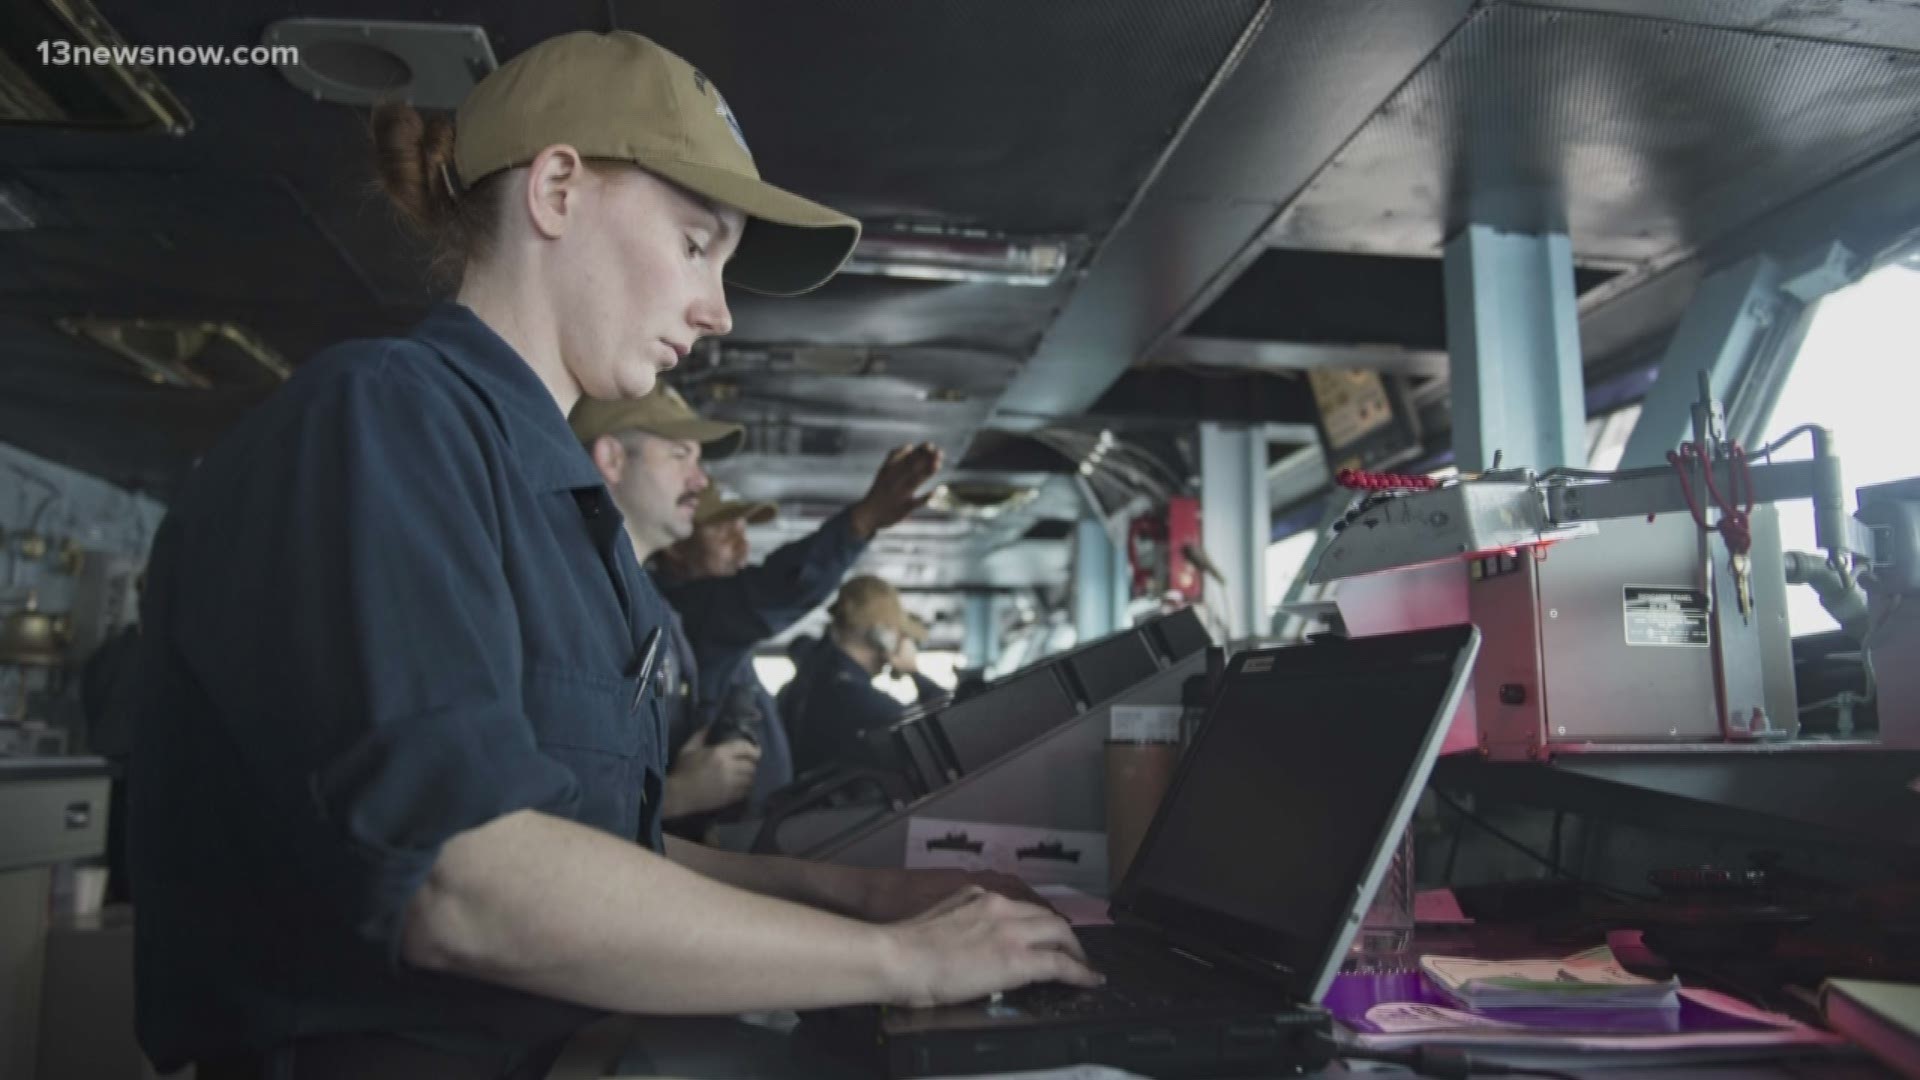 The Navy needs to retain close to 80 percent of its force each year if it hopes to meet staffing requirements of a 355-ship fleet. Lawmakers say one thing all branches could do to keep people is to improve military child care.